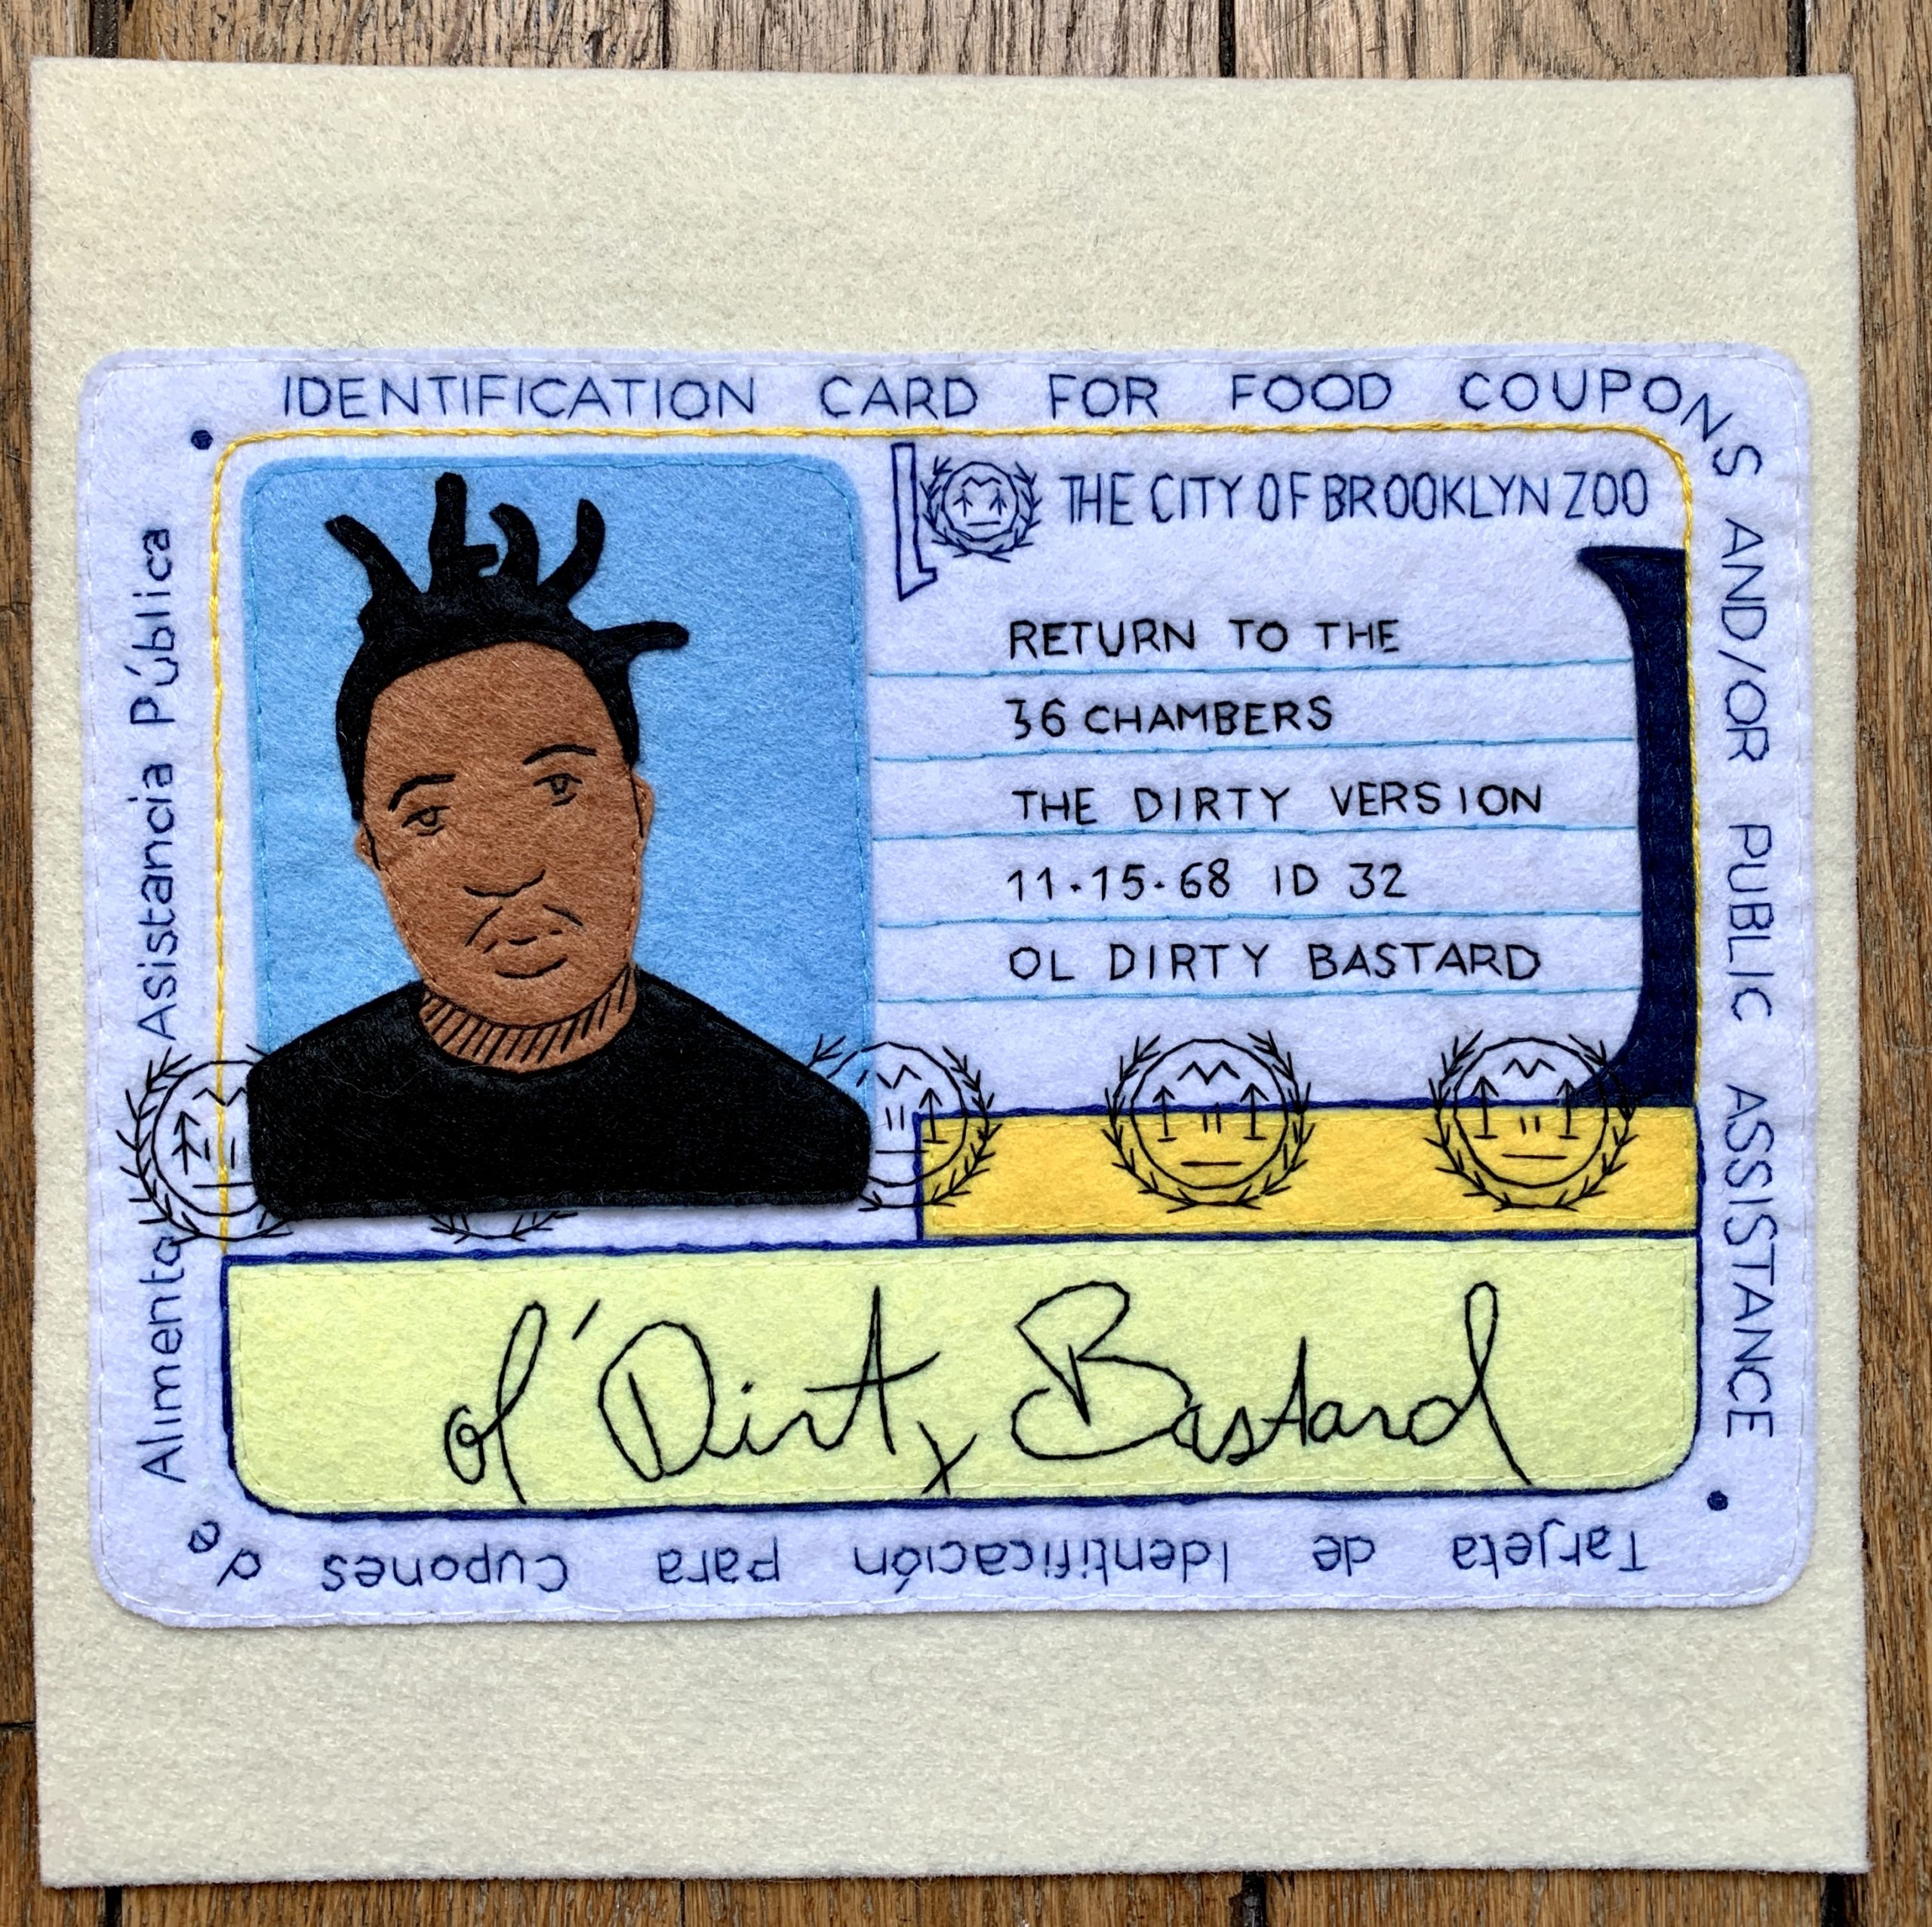 Ol Dirty Bastard – Return To The 36 Chambers: The Dirty Version (1995)